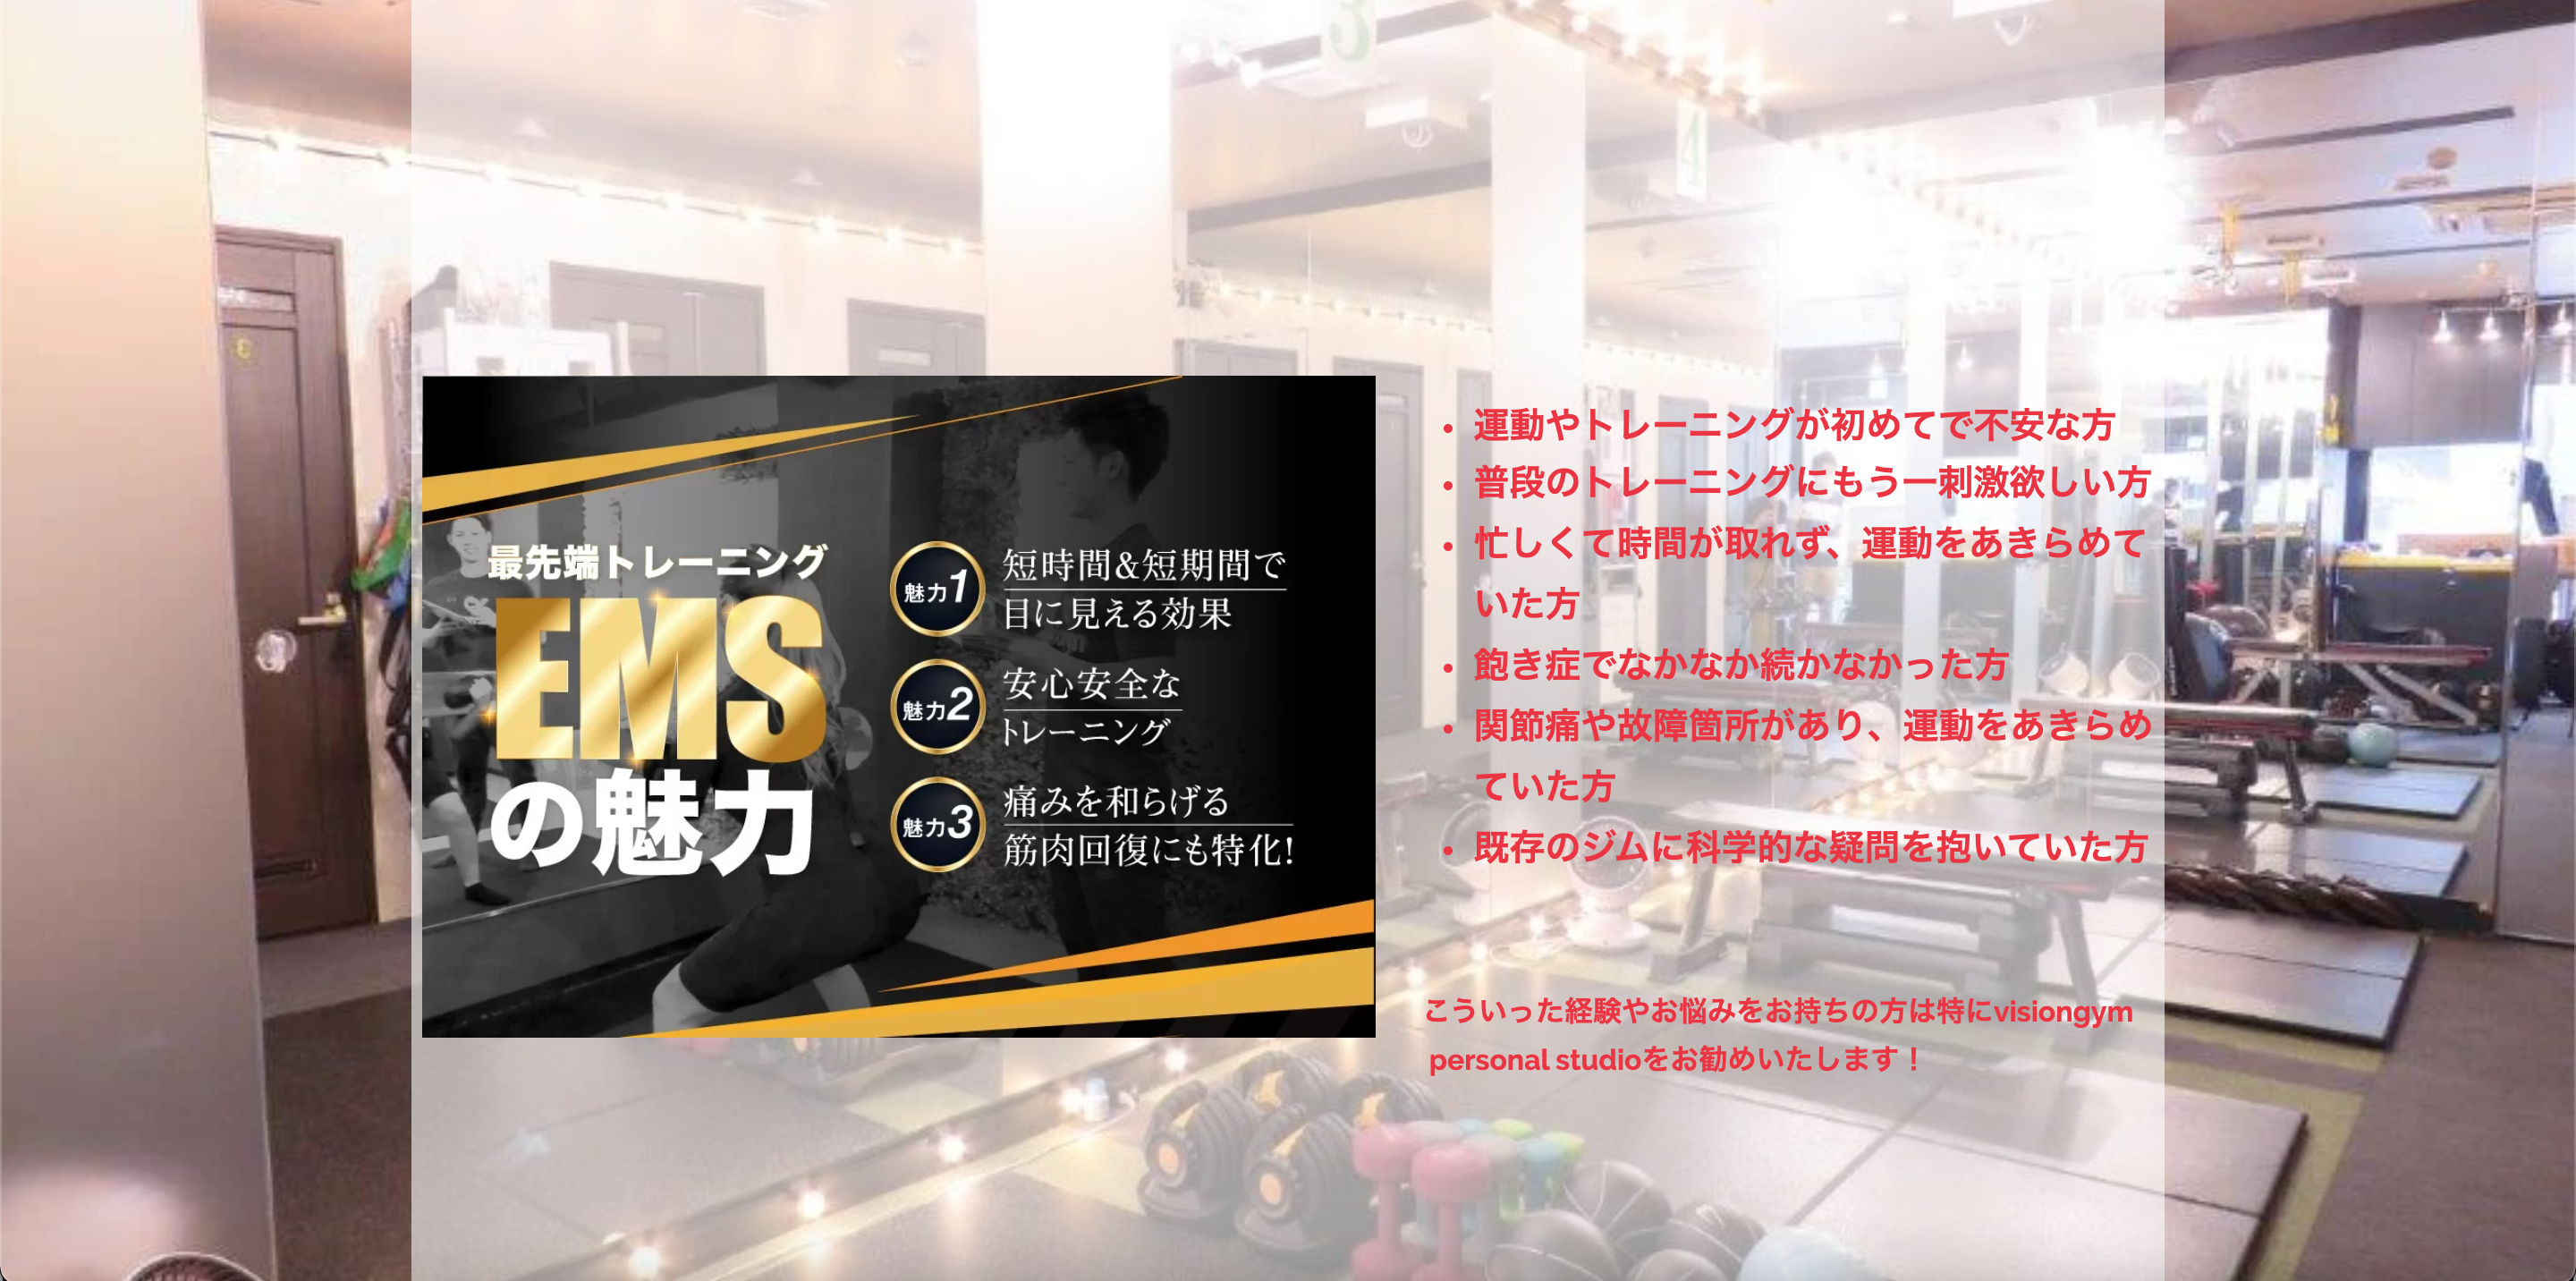 3. ABOUT GYM visiongym personal studio（ビジョンジム）三田店